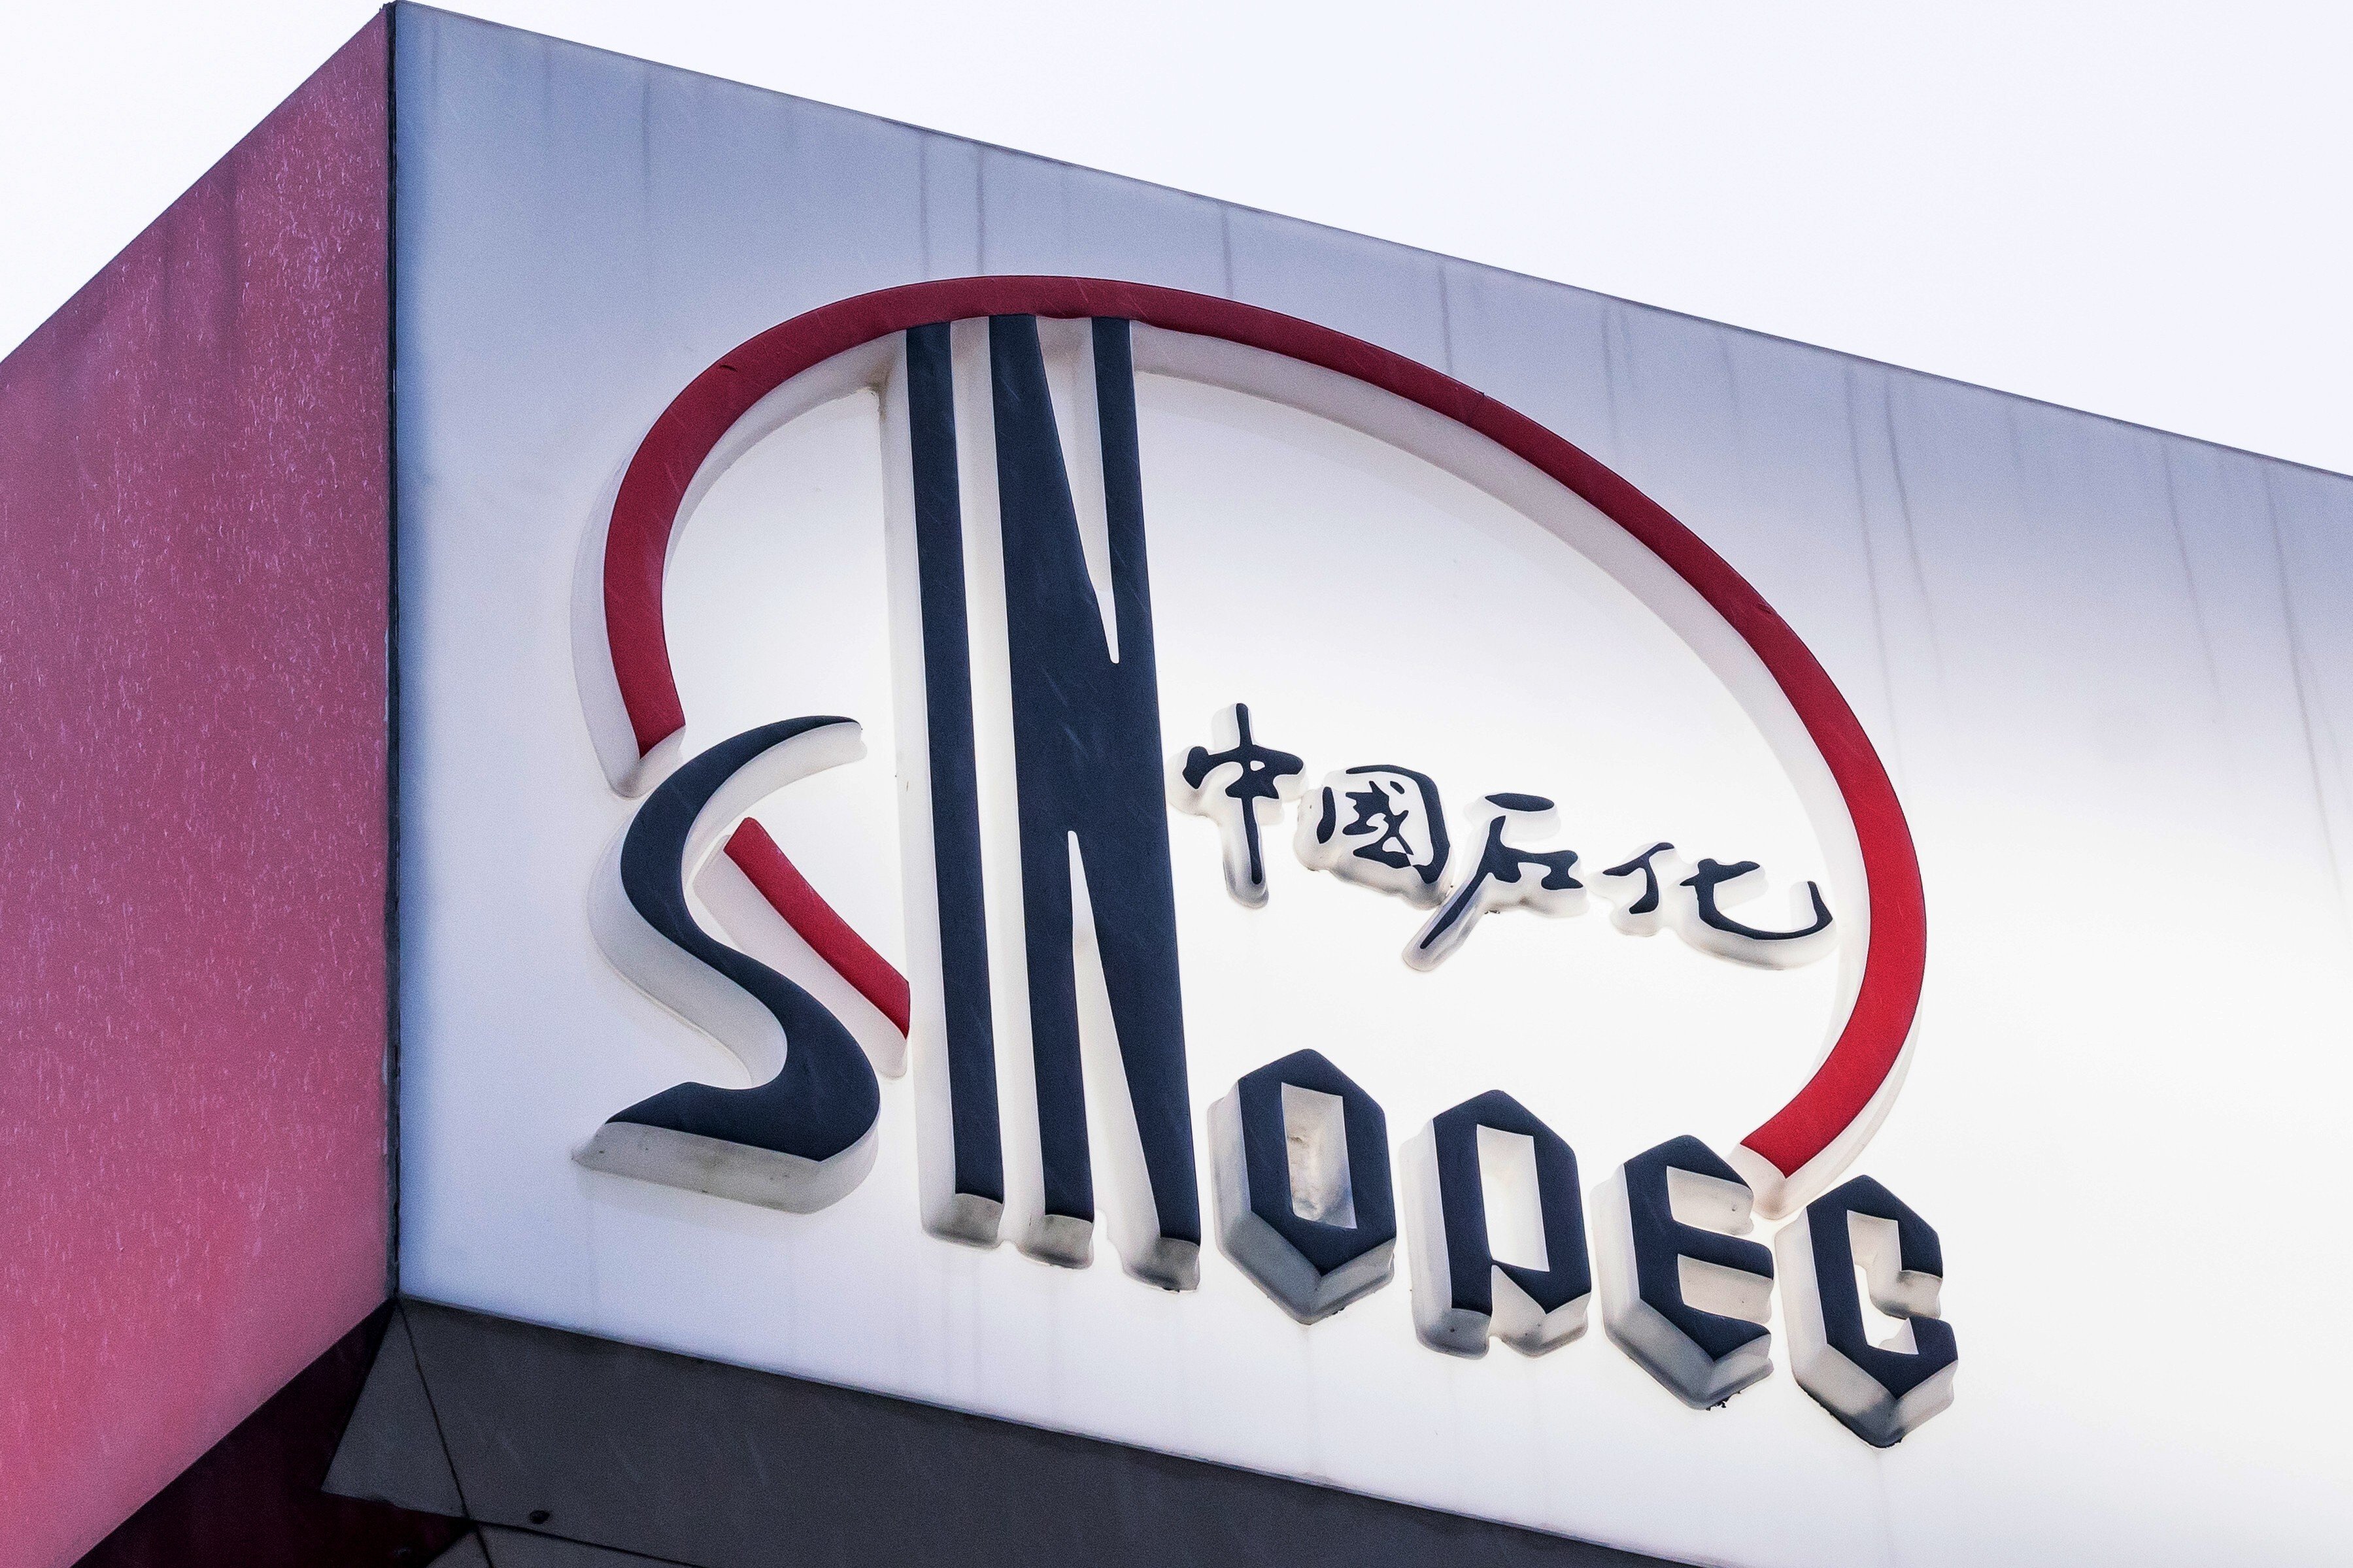 The carbon capture, utilisation and storage project is expected to start operations at the end of this year, Sinopec says. Photo: Bloomberg